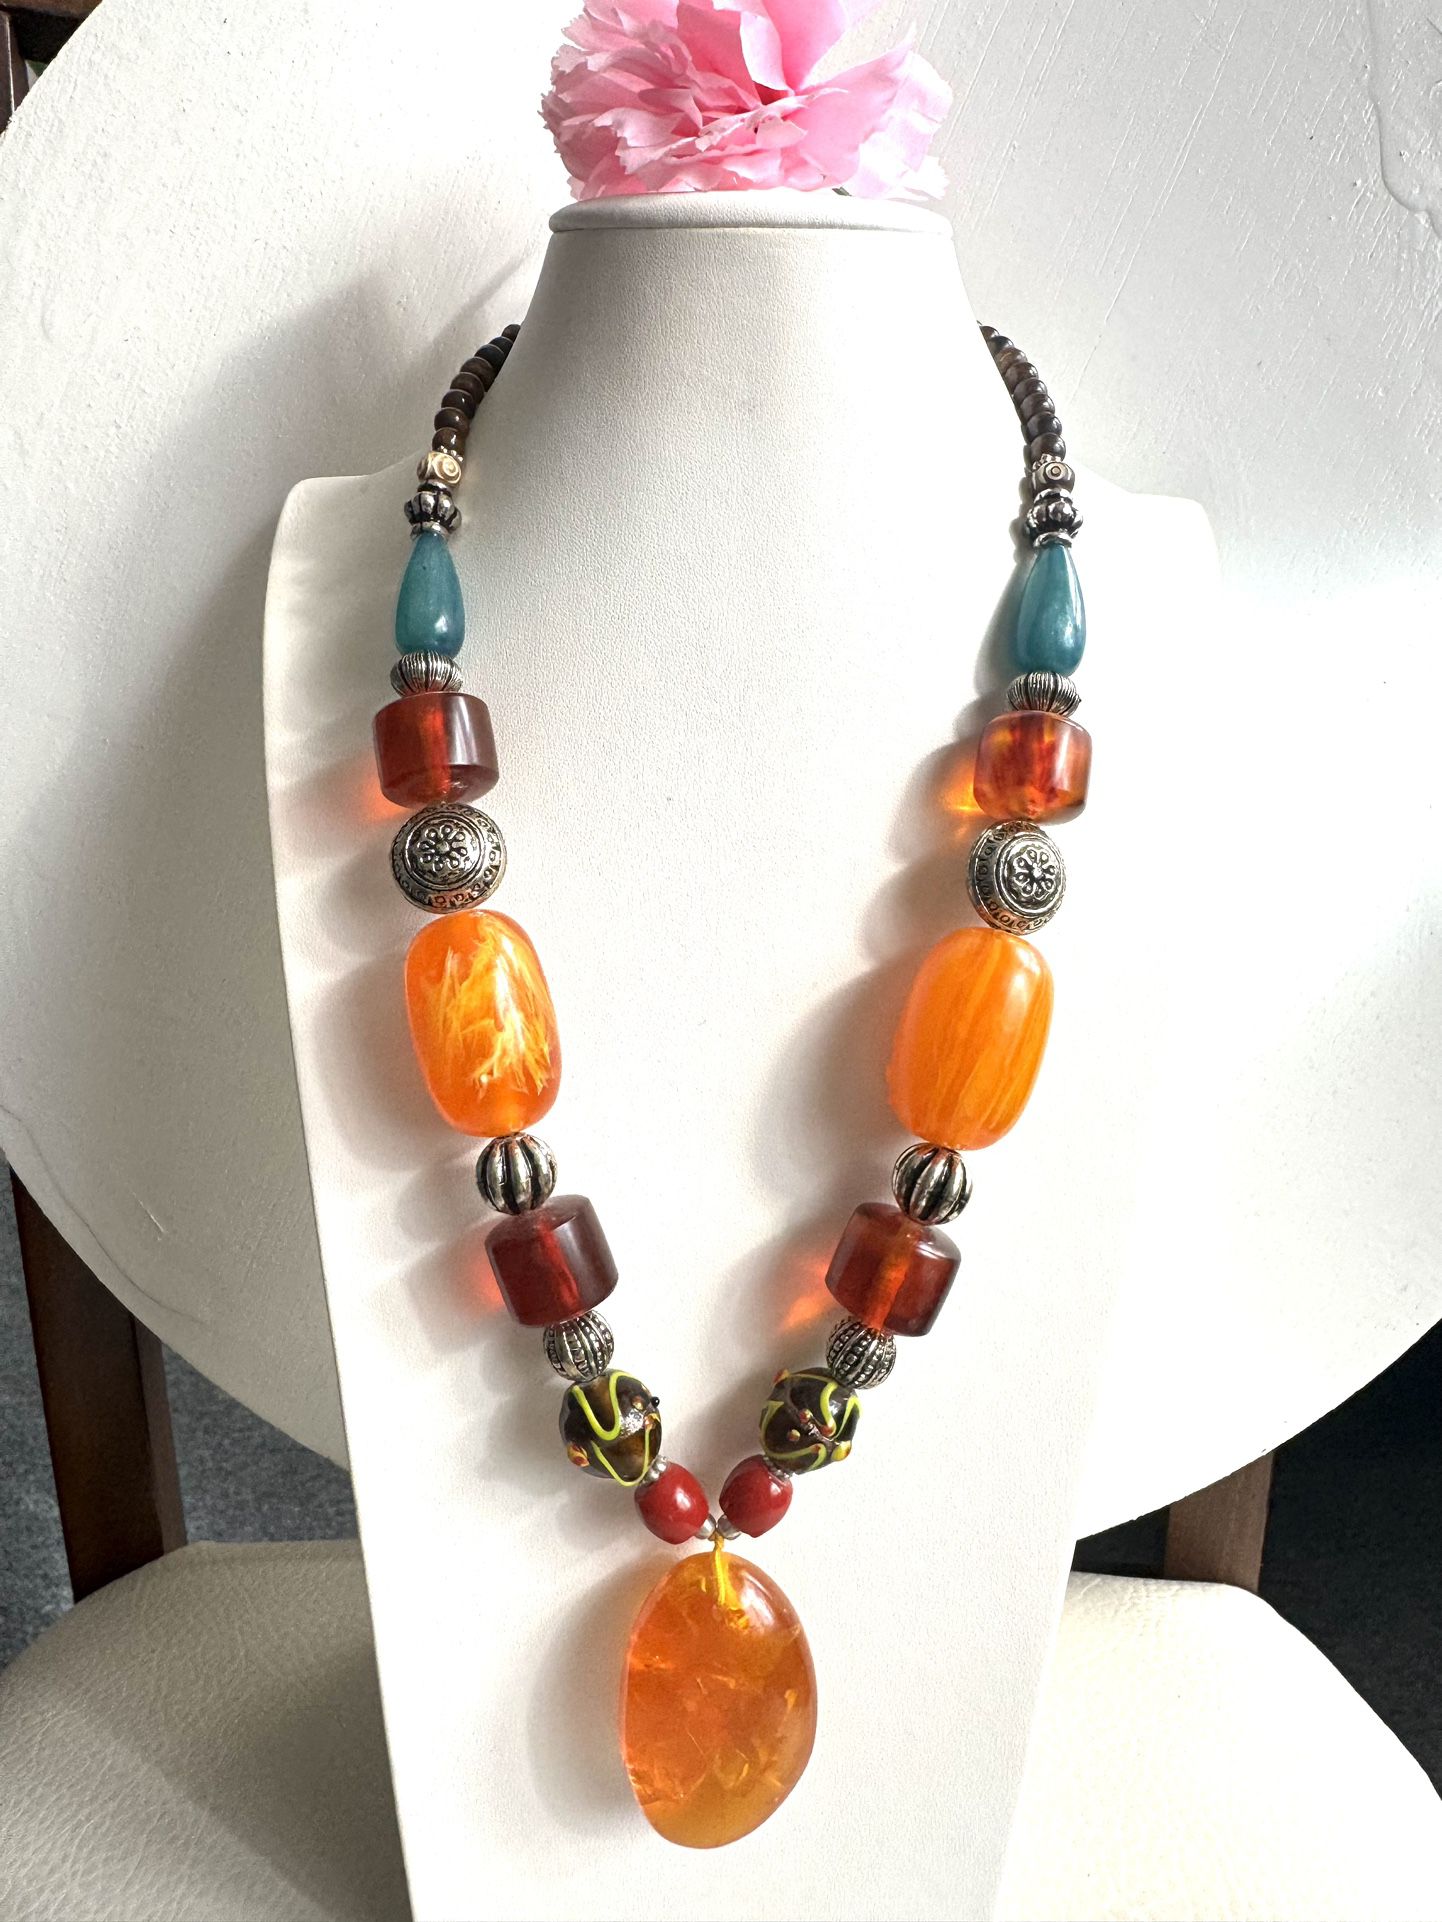 gorgeous and vintage style Amber resin pendant and tibetan silver beads necklace 21”inch